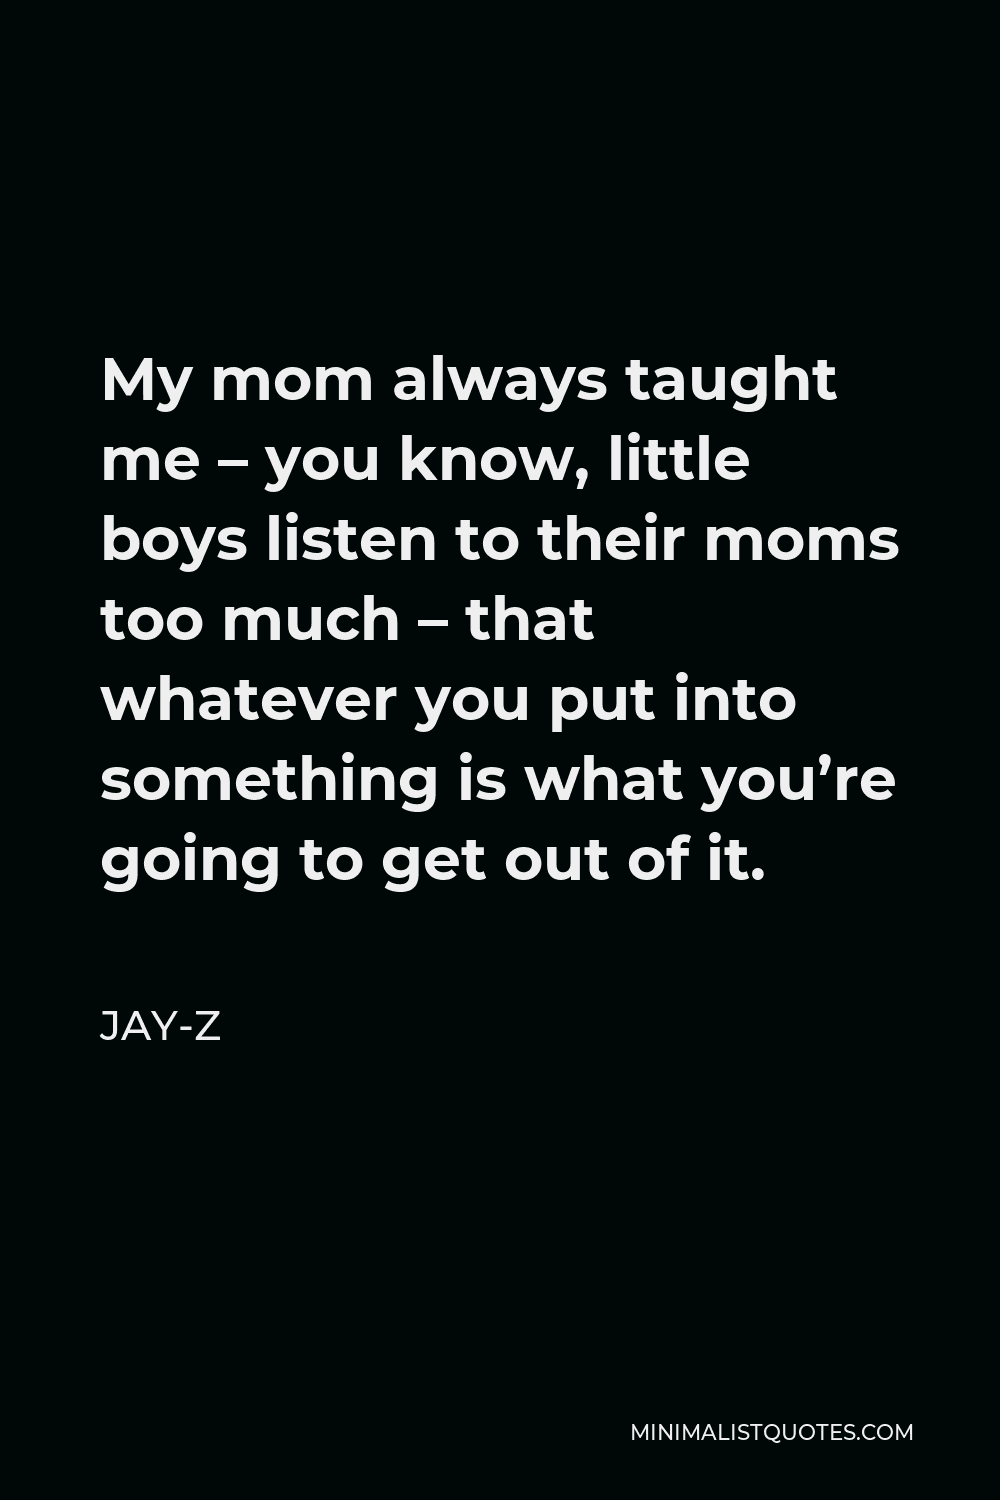 Jay-Z Quote - My mom always taught me – you know, little boys listen to their moms too much – that whatever you put into something is what you’re going to get out of it.